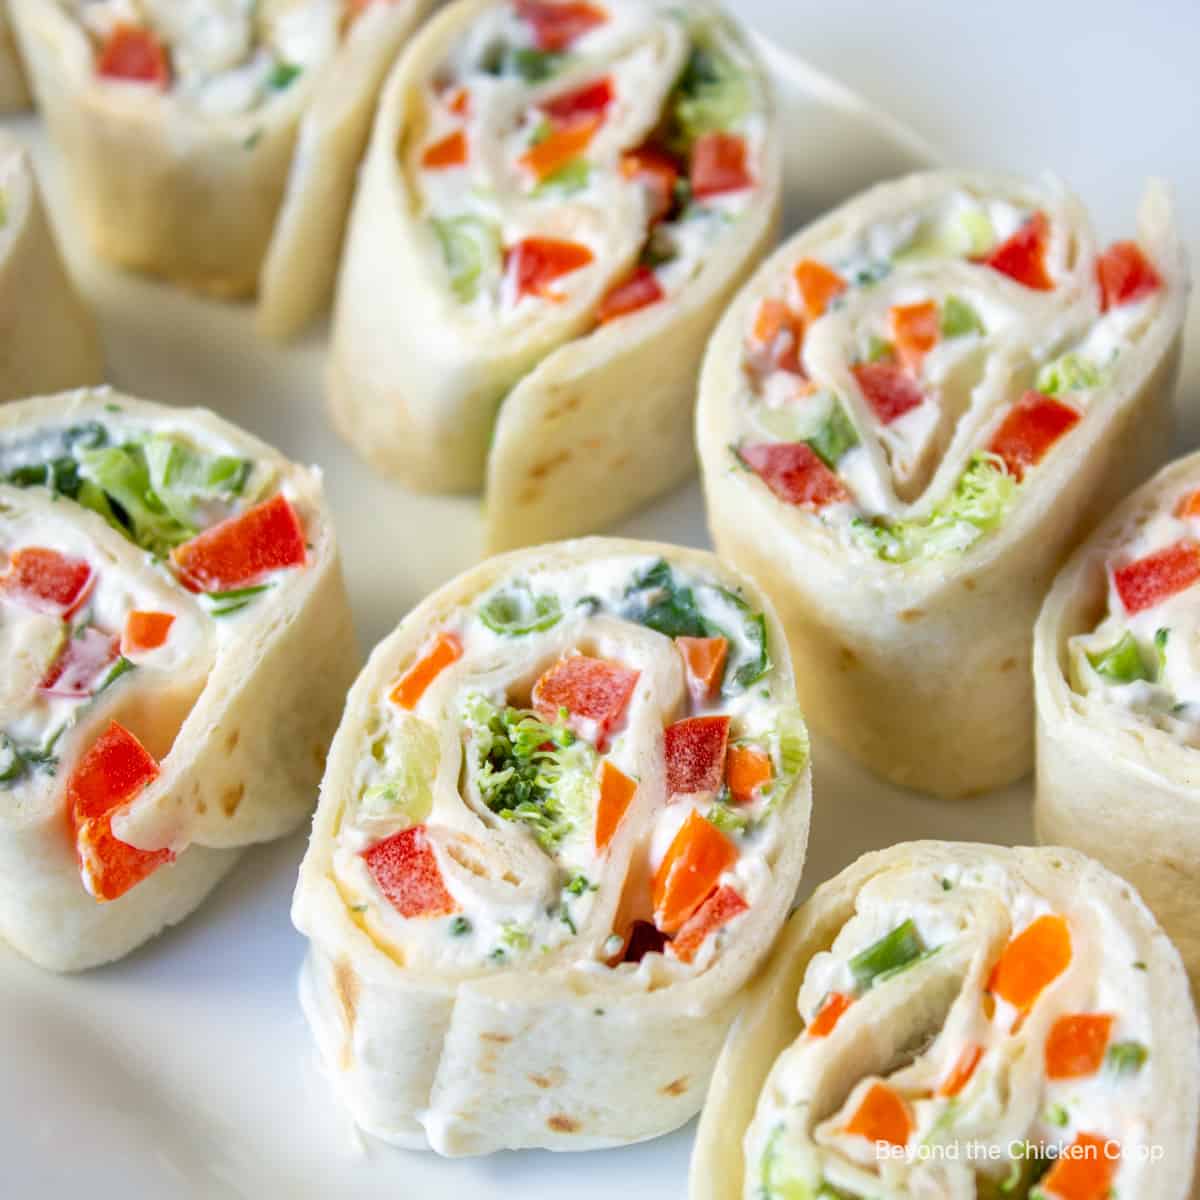 Tortilla pinwheels filled with cream cheese and veggies.